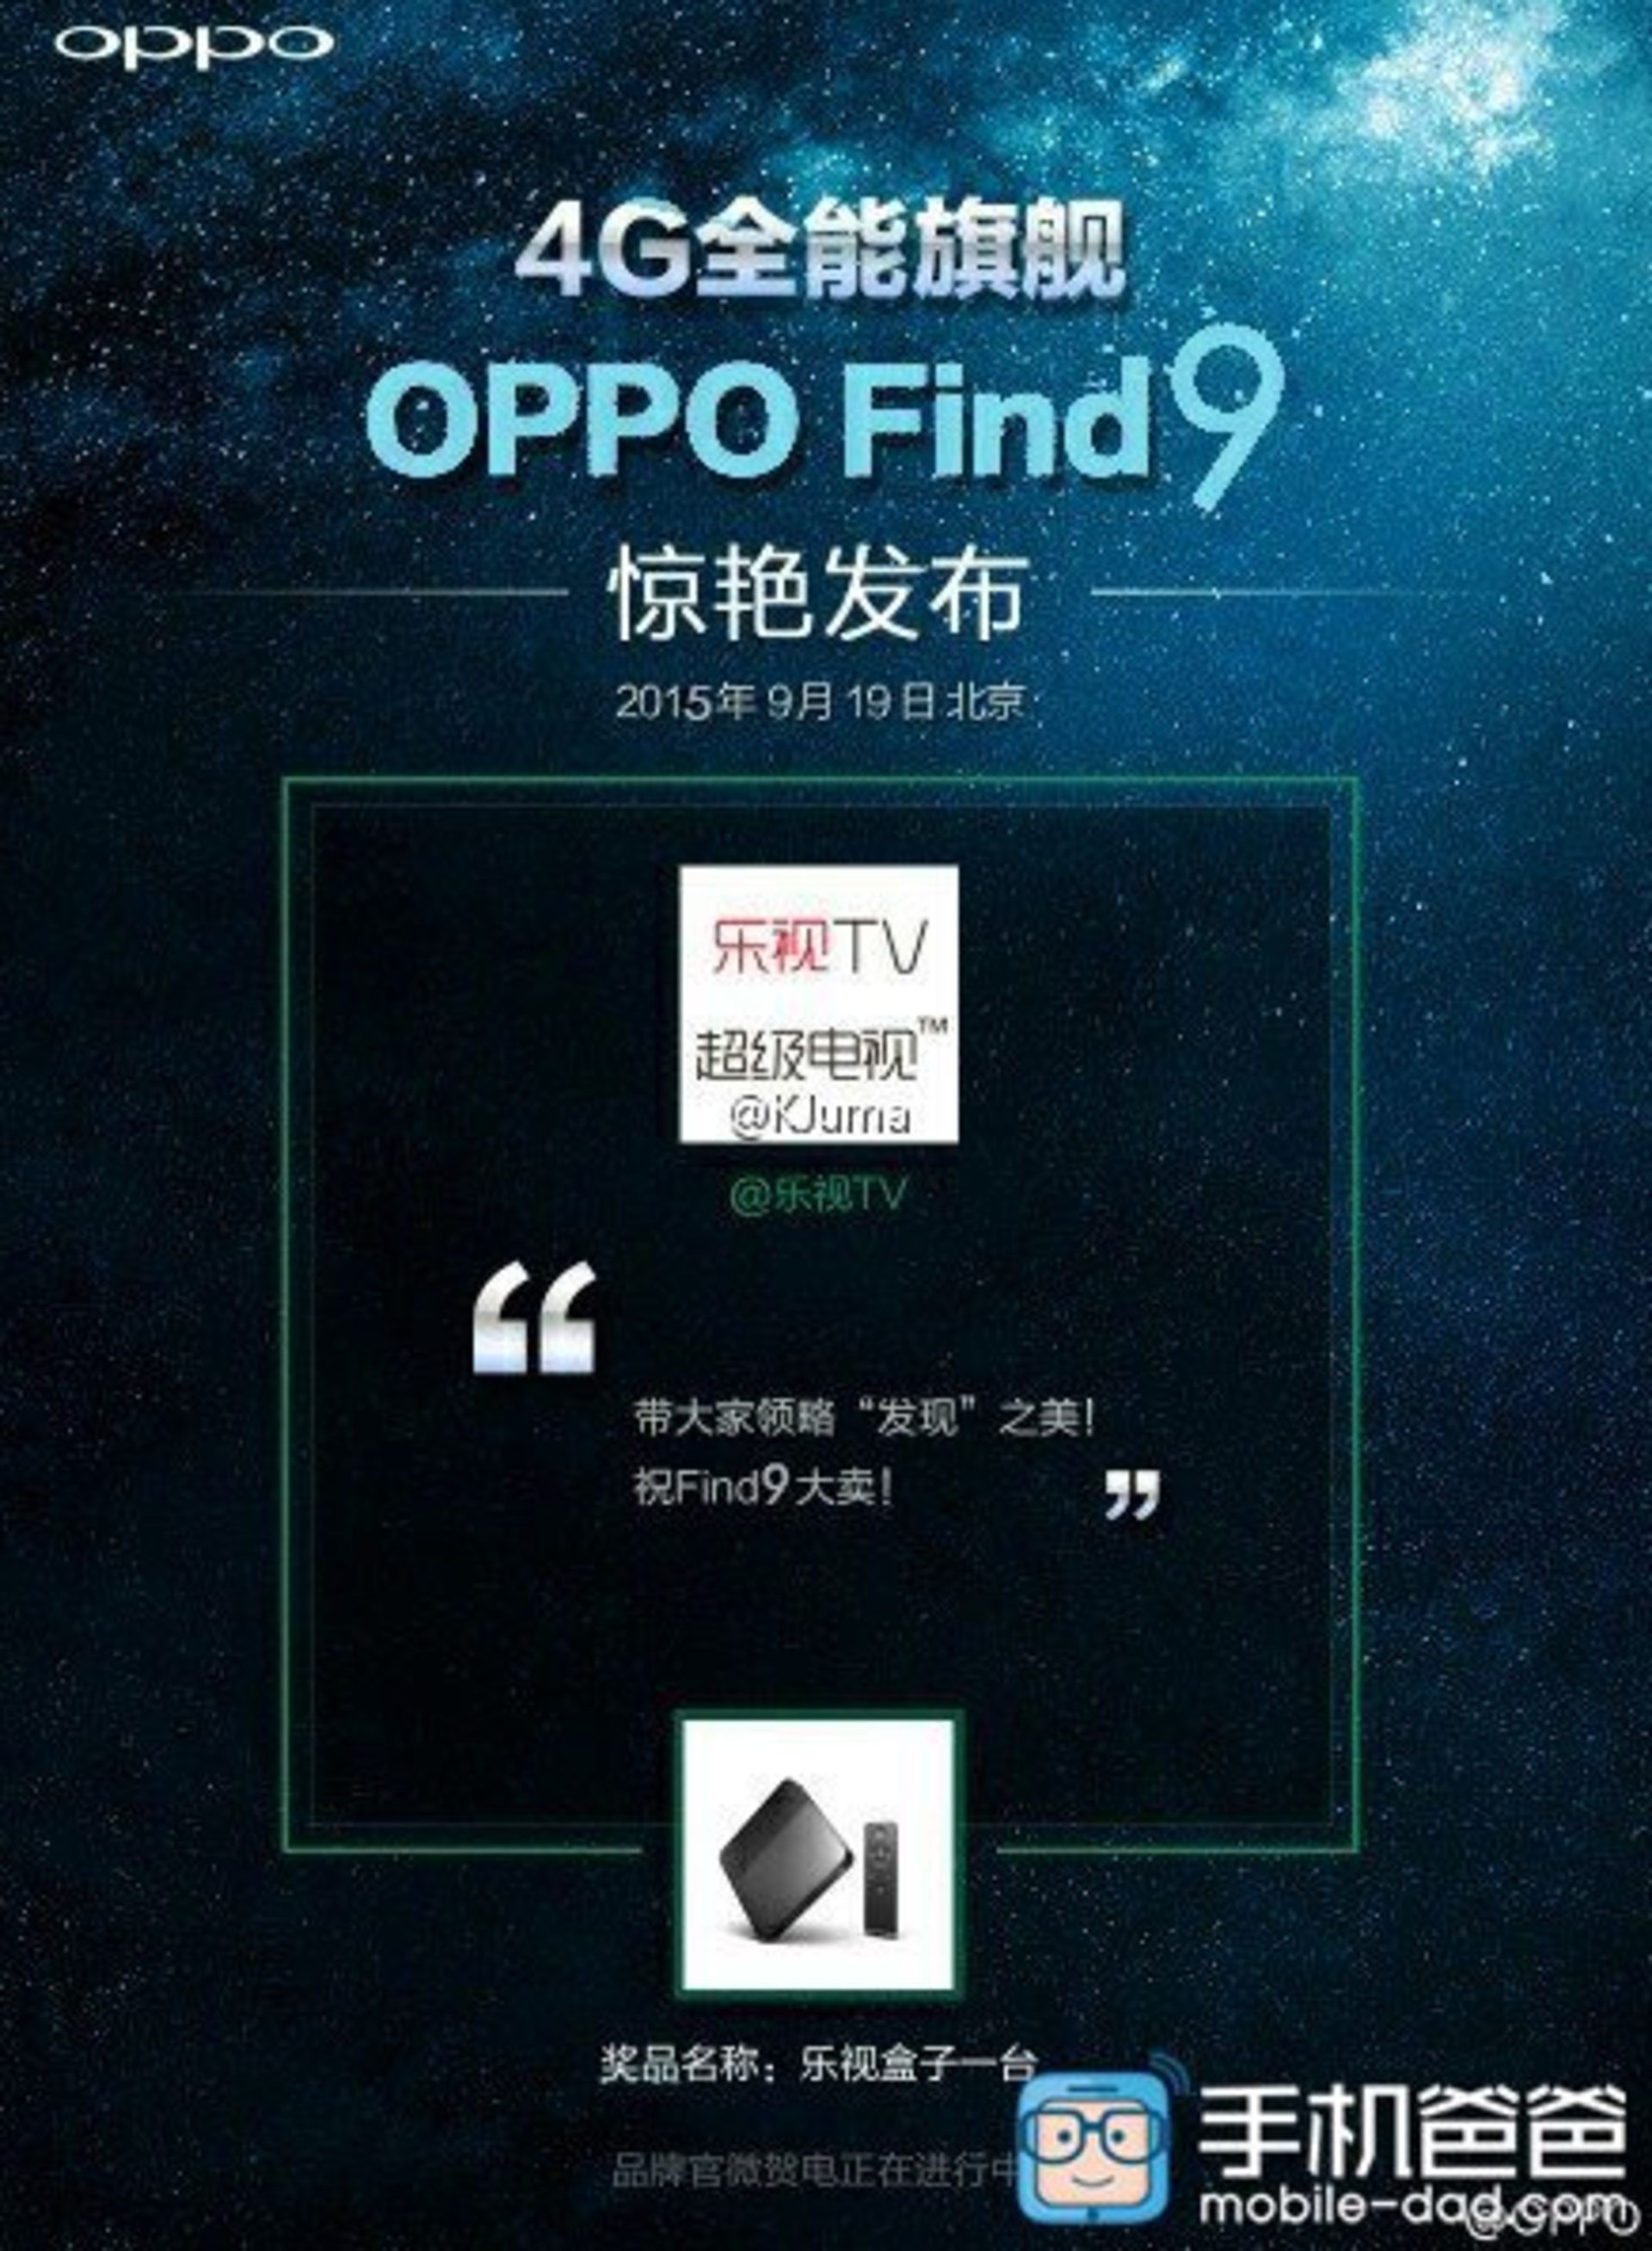 Teaser reveals September 19th unveiling date for the Oppo Find 9